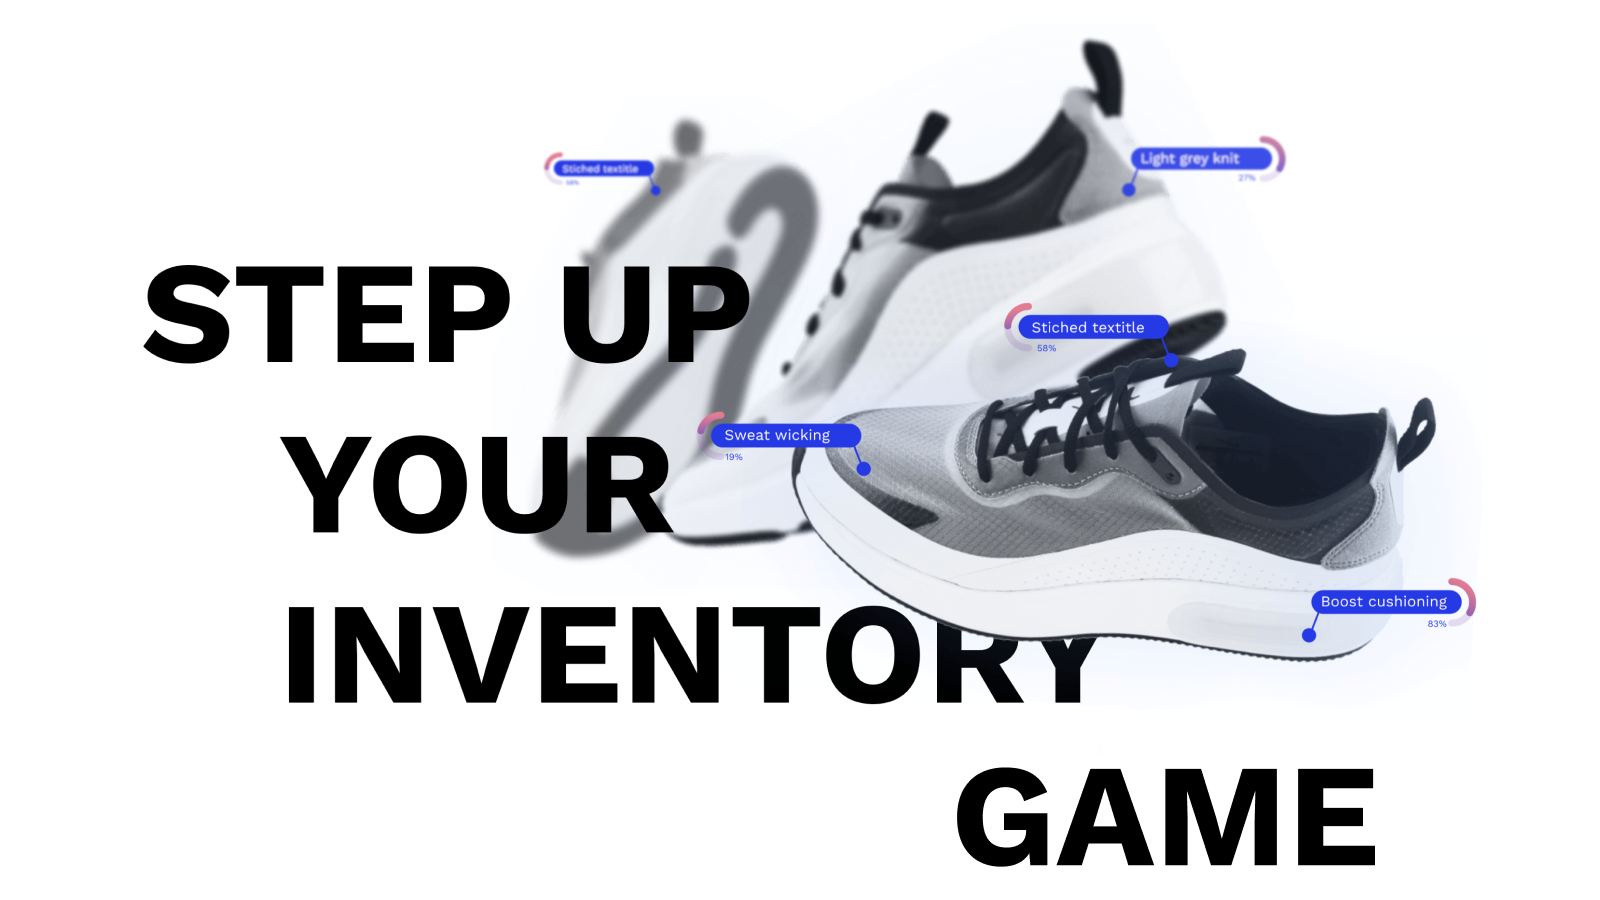 Step Up Your Inventory Game